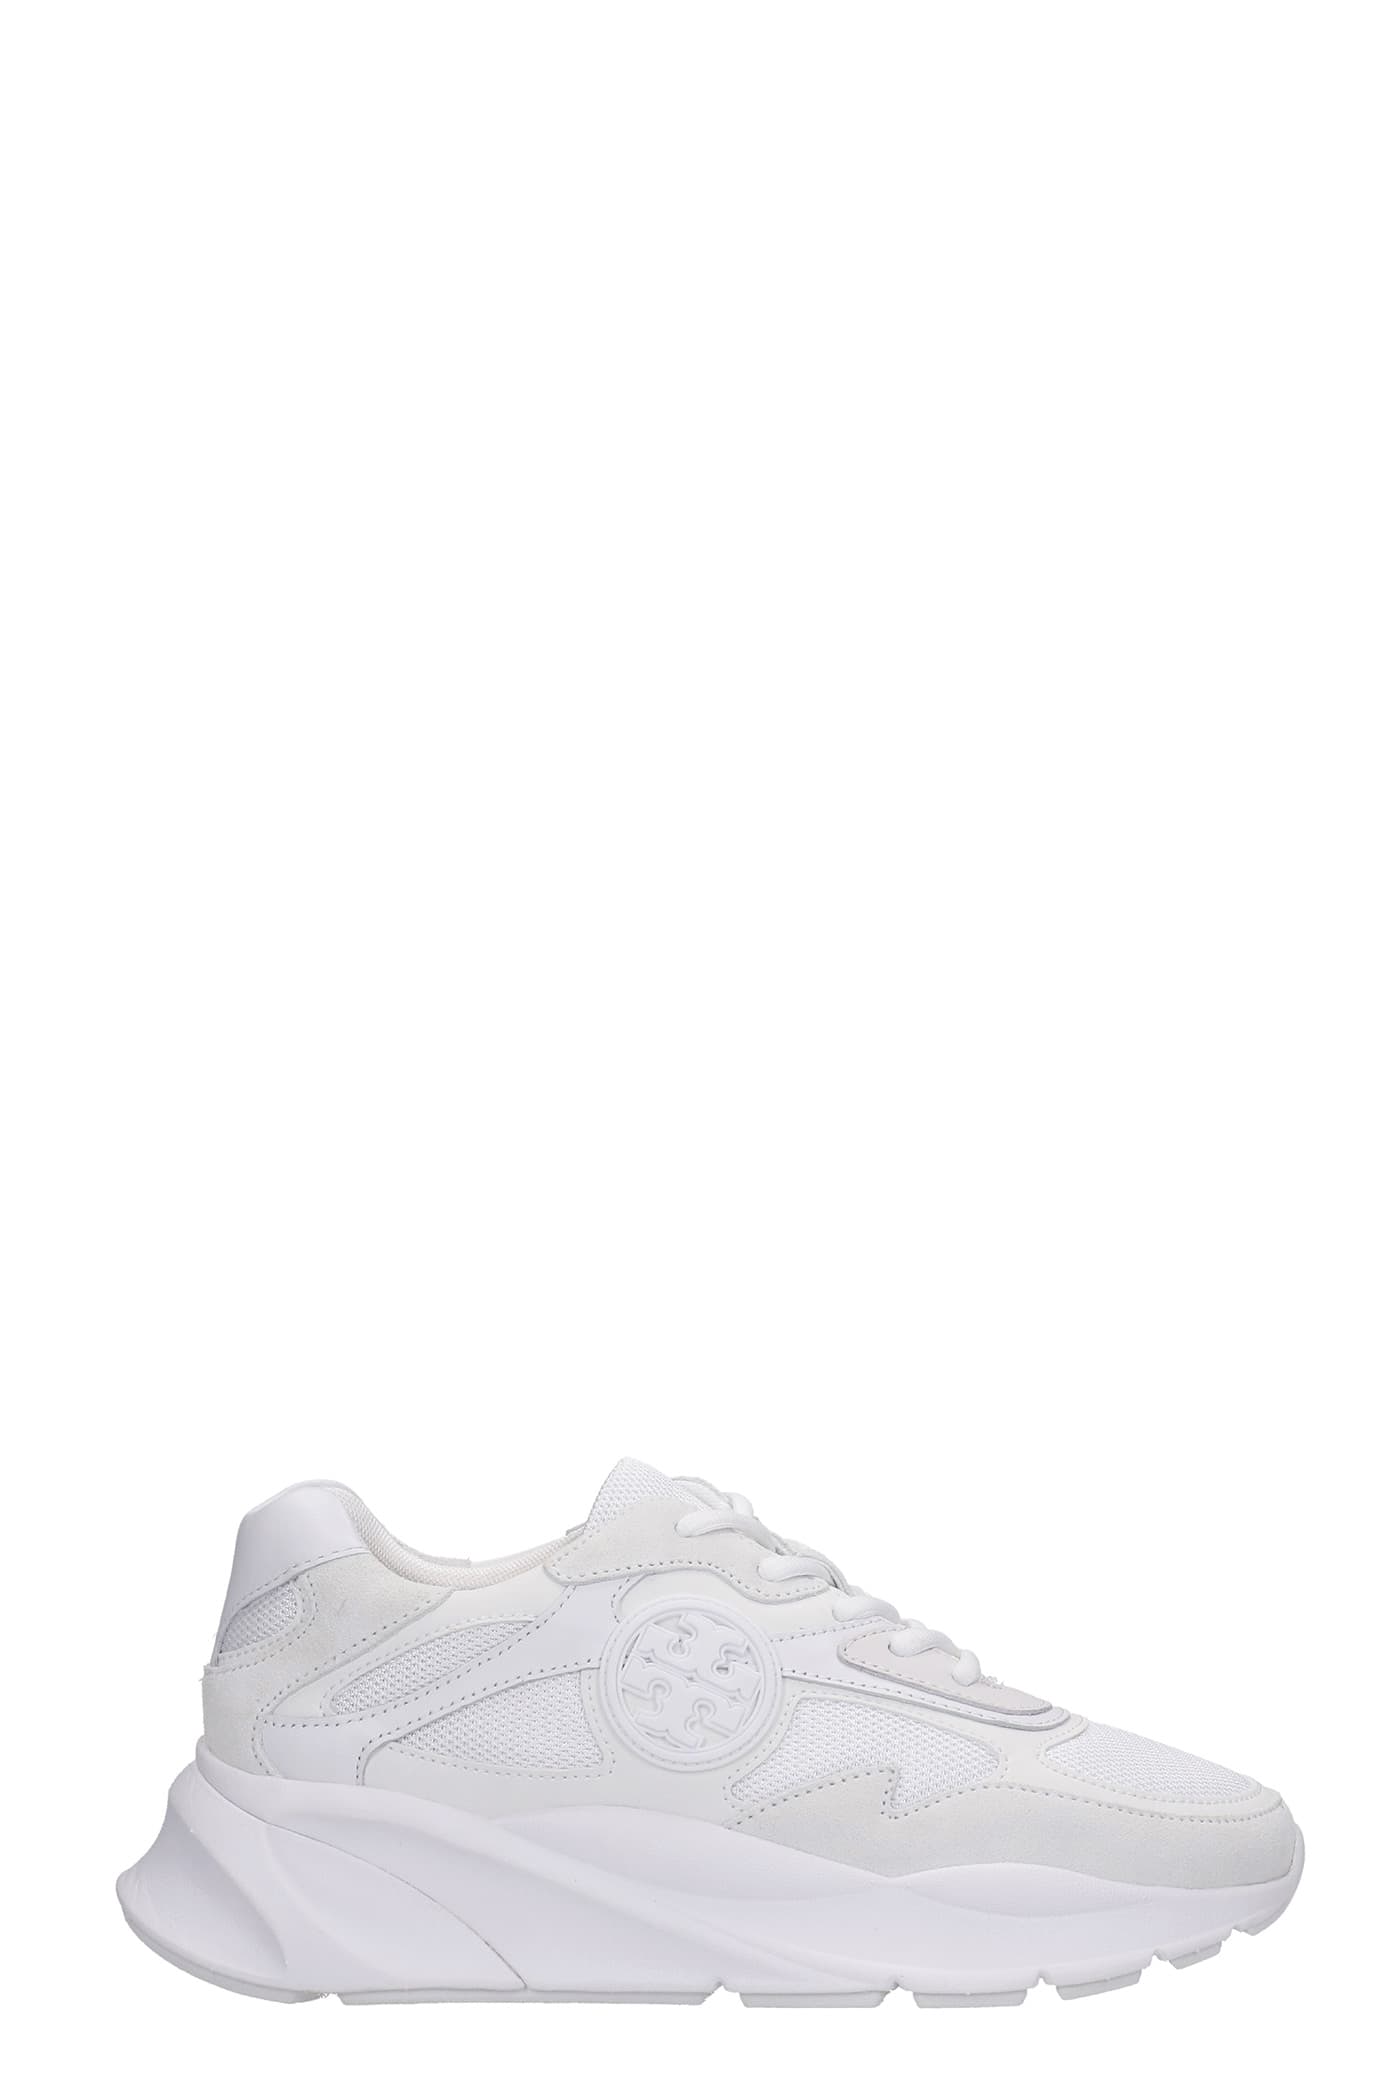 Tory Burch Sawyer Sneakers In White Synthetic Fibers